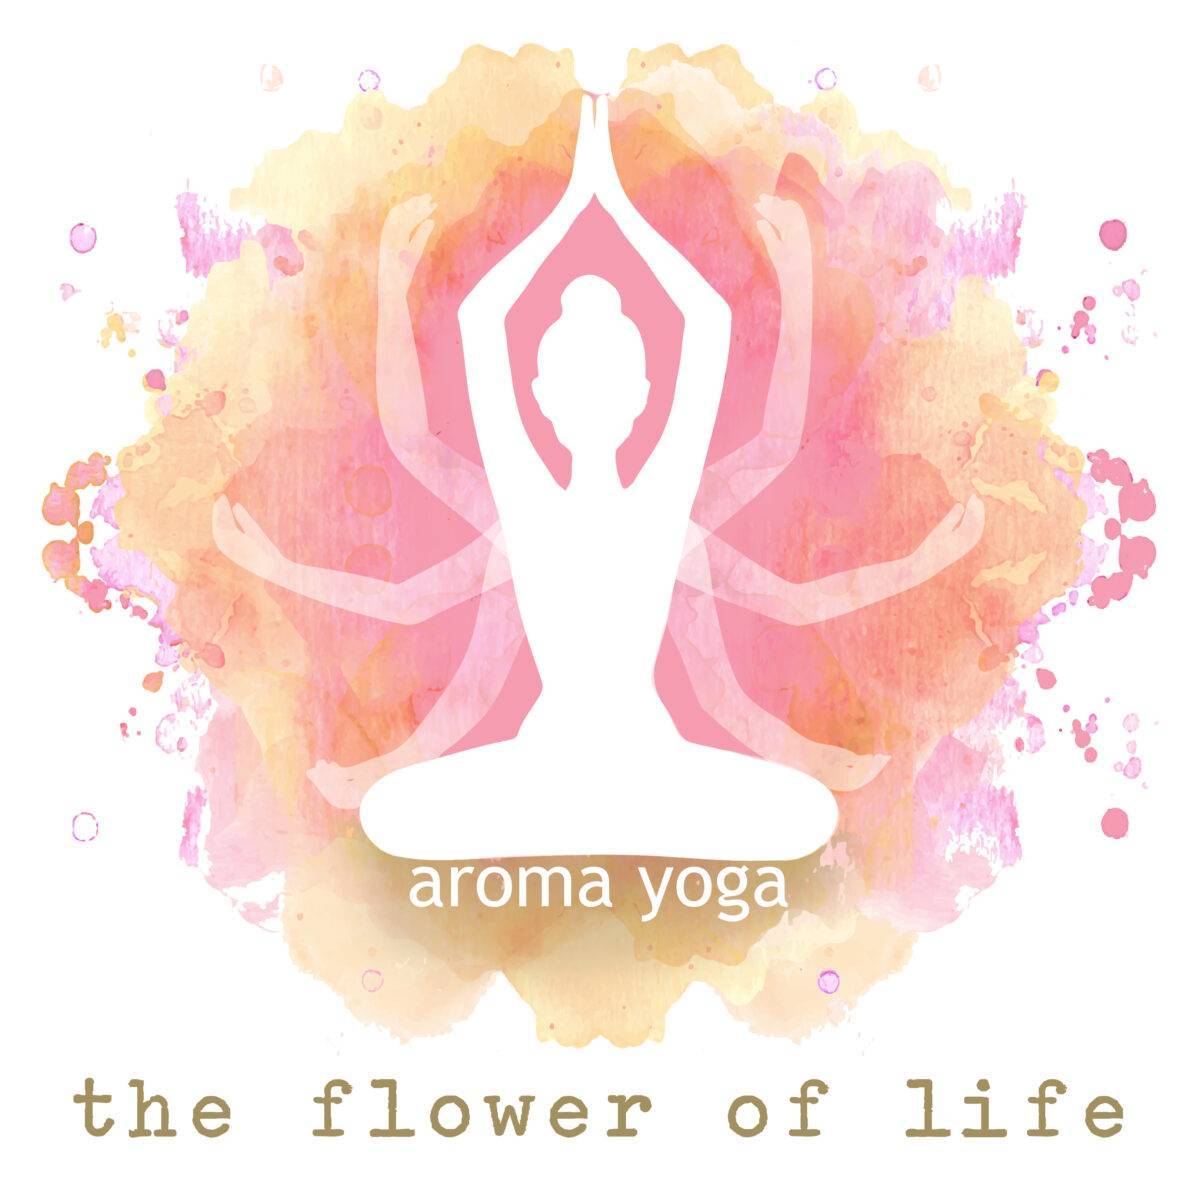 aroma yoga - the flower of life